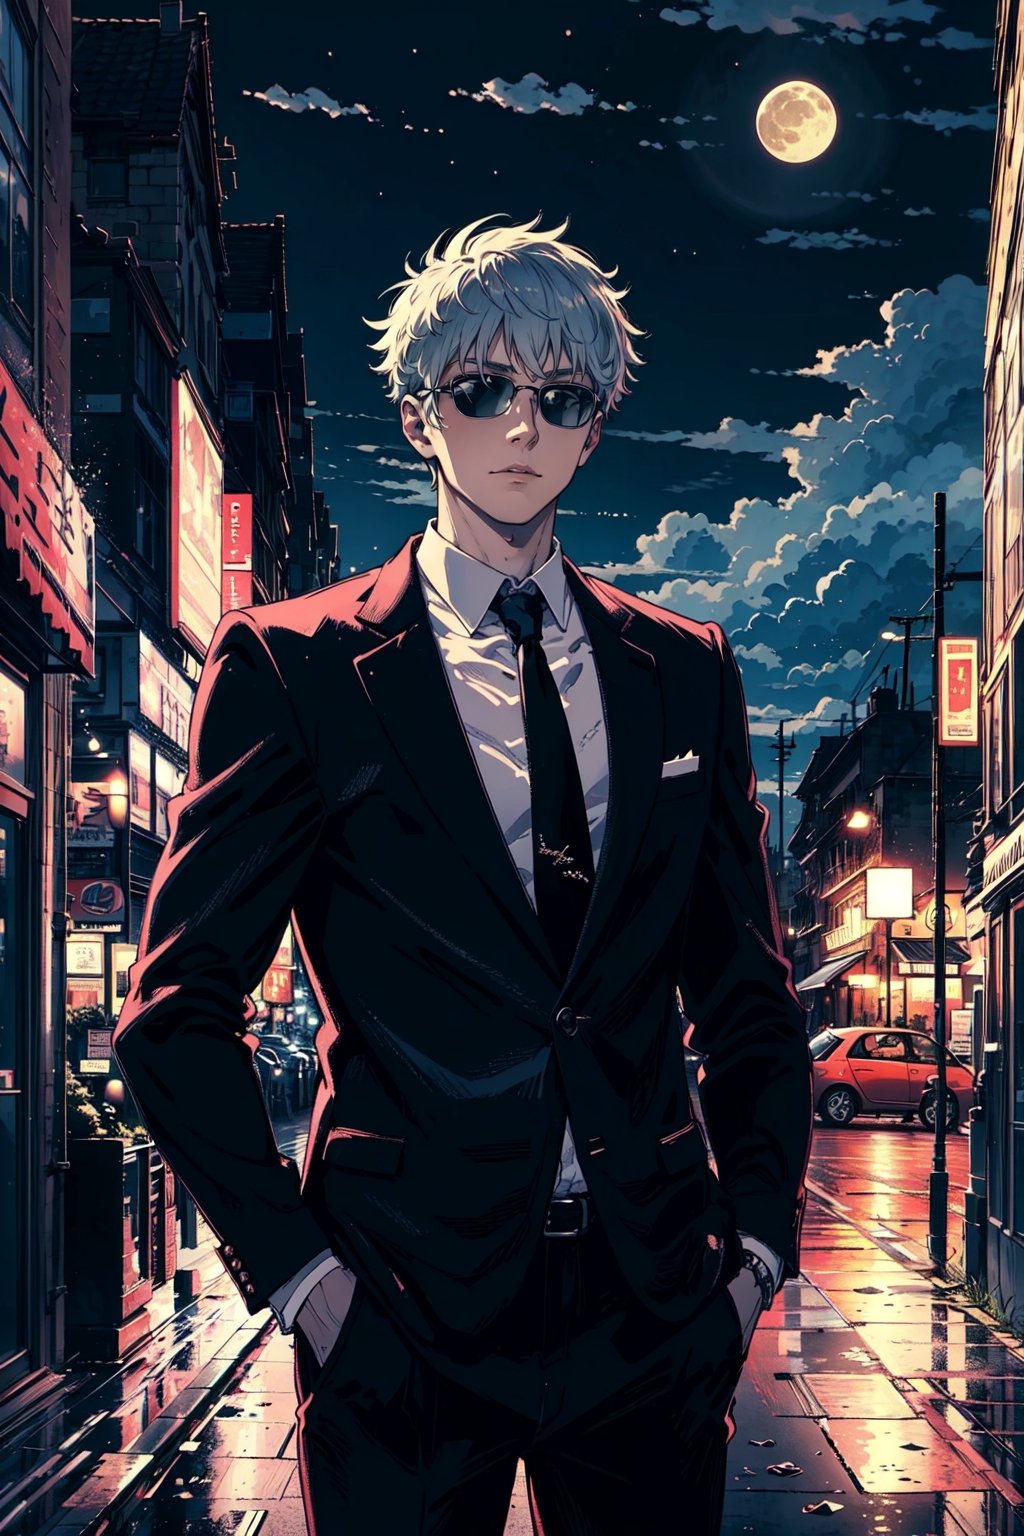 man mature, Hands in the pocket, in the background a city, car, fullmoon, work of art, wallpaper, soft shading, suit without tie, pastelbg, 